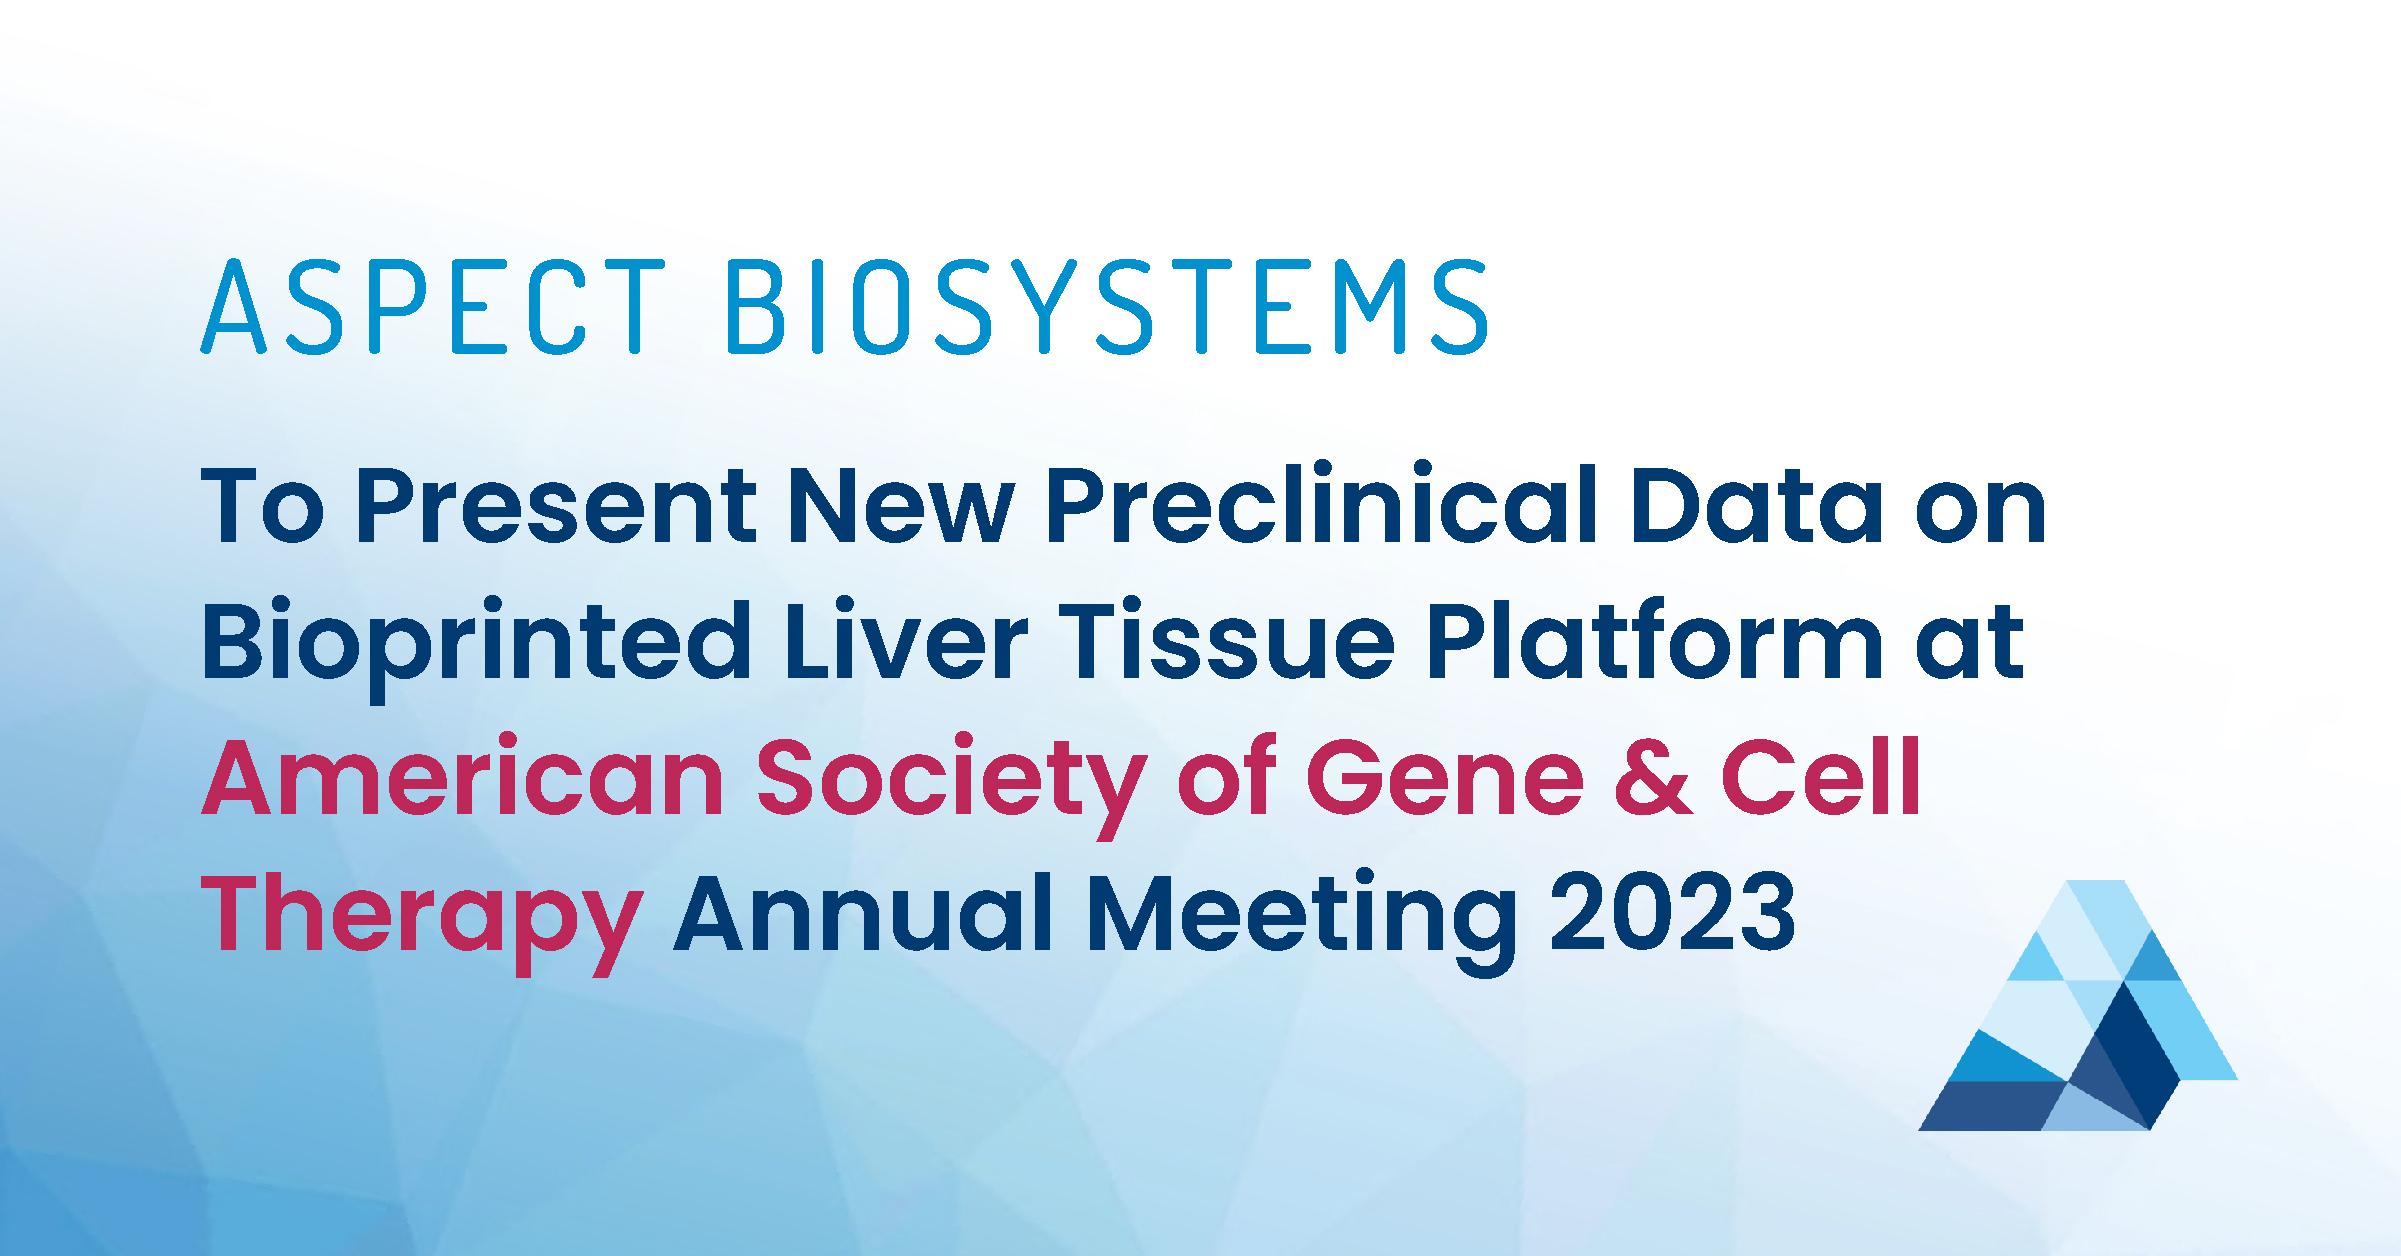 Product Aspect Biosystems to Present New Preclinical Data on Bioprinted Liver Tissue Platform at American Society of Gene & Cell Therapy Annual Meeting 2023 image